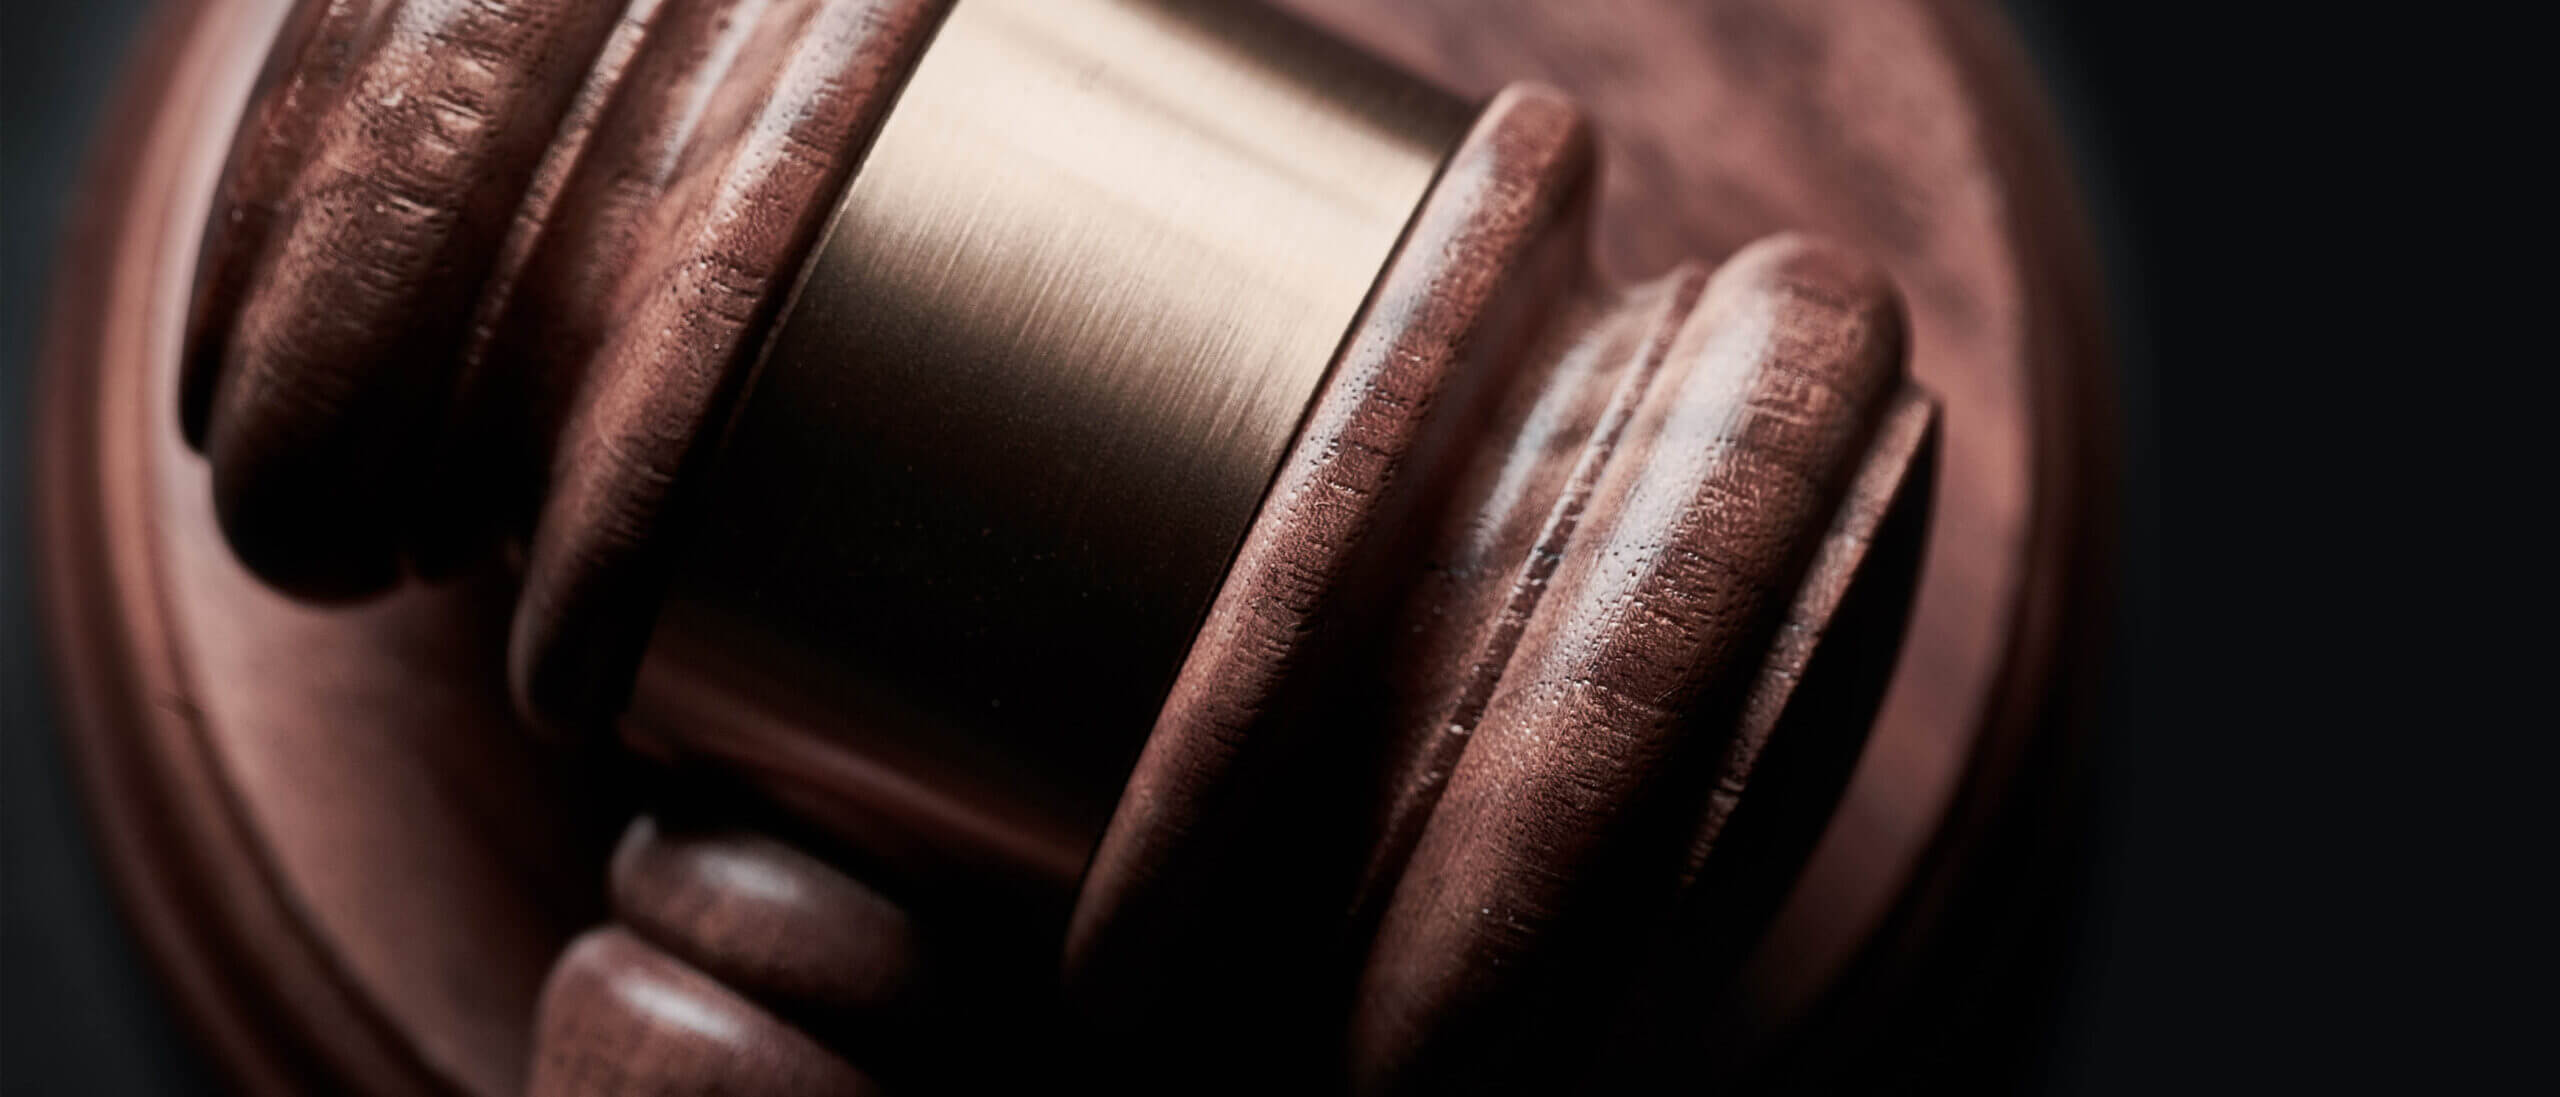 Image of a gavel